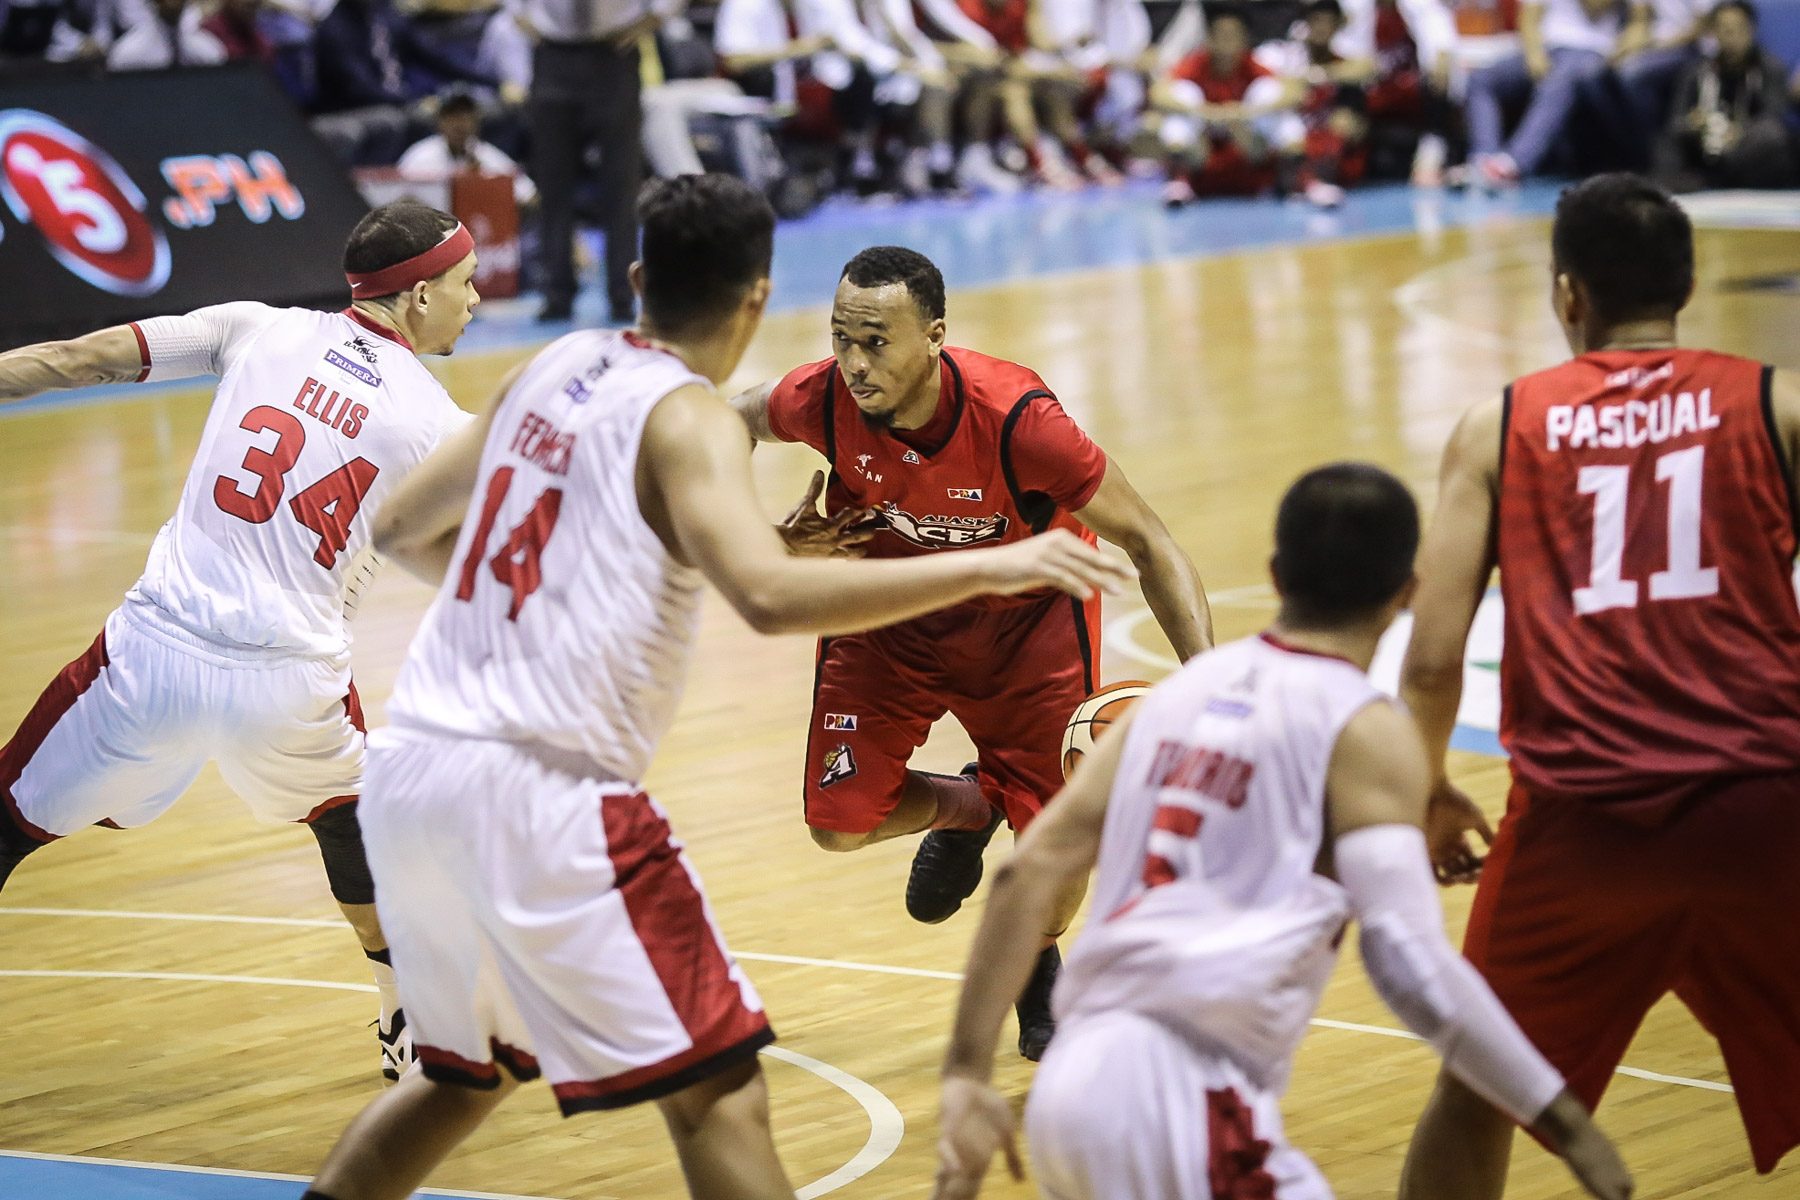 WATCH: Calvin Abueva flashes middle finger after hitting 3-pointer